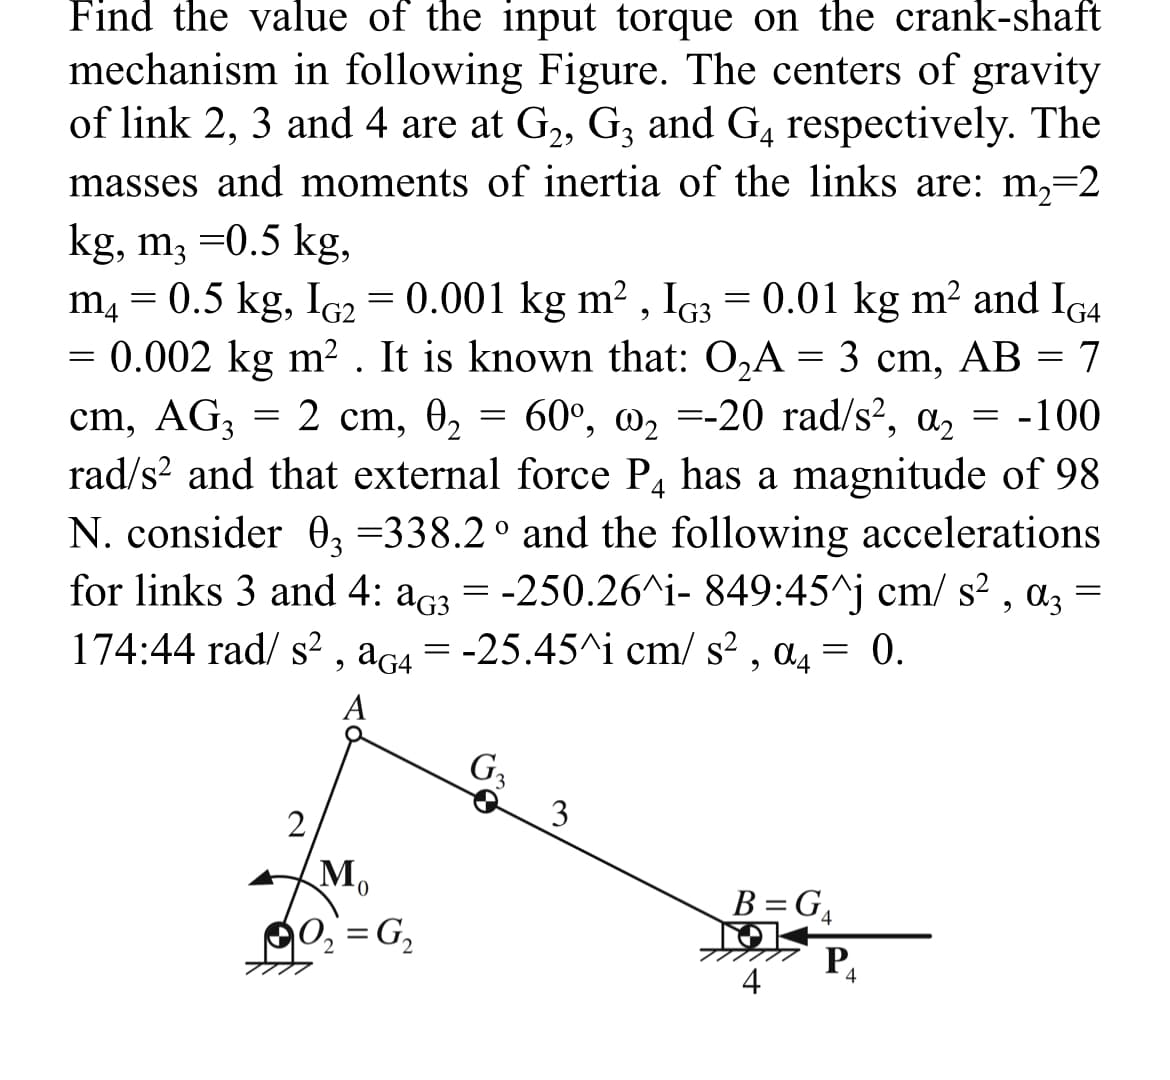 Find the value of the input torque on the crank-shaft
mechanism in following Figure. The centers of gravity
of link 2, 3 and 4 are at G₂, G3 and G4 respectively. The
masses and moments of inertia of the links are: m₂=2
kg, m3 =0.5 kg,
m4 = 0.5 kg, IG2 = 0.001 kg m², IG3 = 0.01 kg m² and IG4
= 0.002 kg m². It is known that: O₂A = 3 cm, AB = 7
cm, AG3 = 2 cm, 0₂ = 60°, @₂=-20 rad/s², a₂ = -100
rad/s² and that external force P4 has a magnitude of 98
N. consider 03 =338.2° and the following accelerations
for links 3 and 4: a3 = -250.26^i- 849:45^j cm/ s², α3 =
A3
174:44 rad/ s², aG4 = -25.45^i cm/s², a4 = 0.
A
2
Mo
0
10₂=G₂
G₂
3
B=G4
P₁